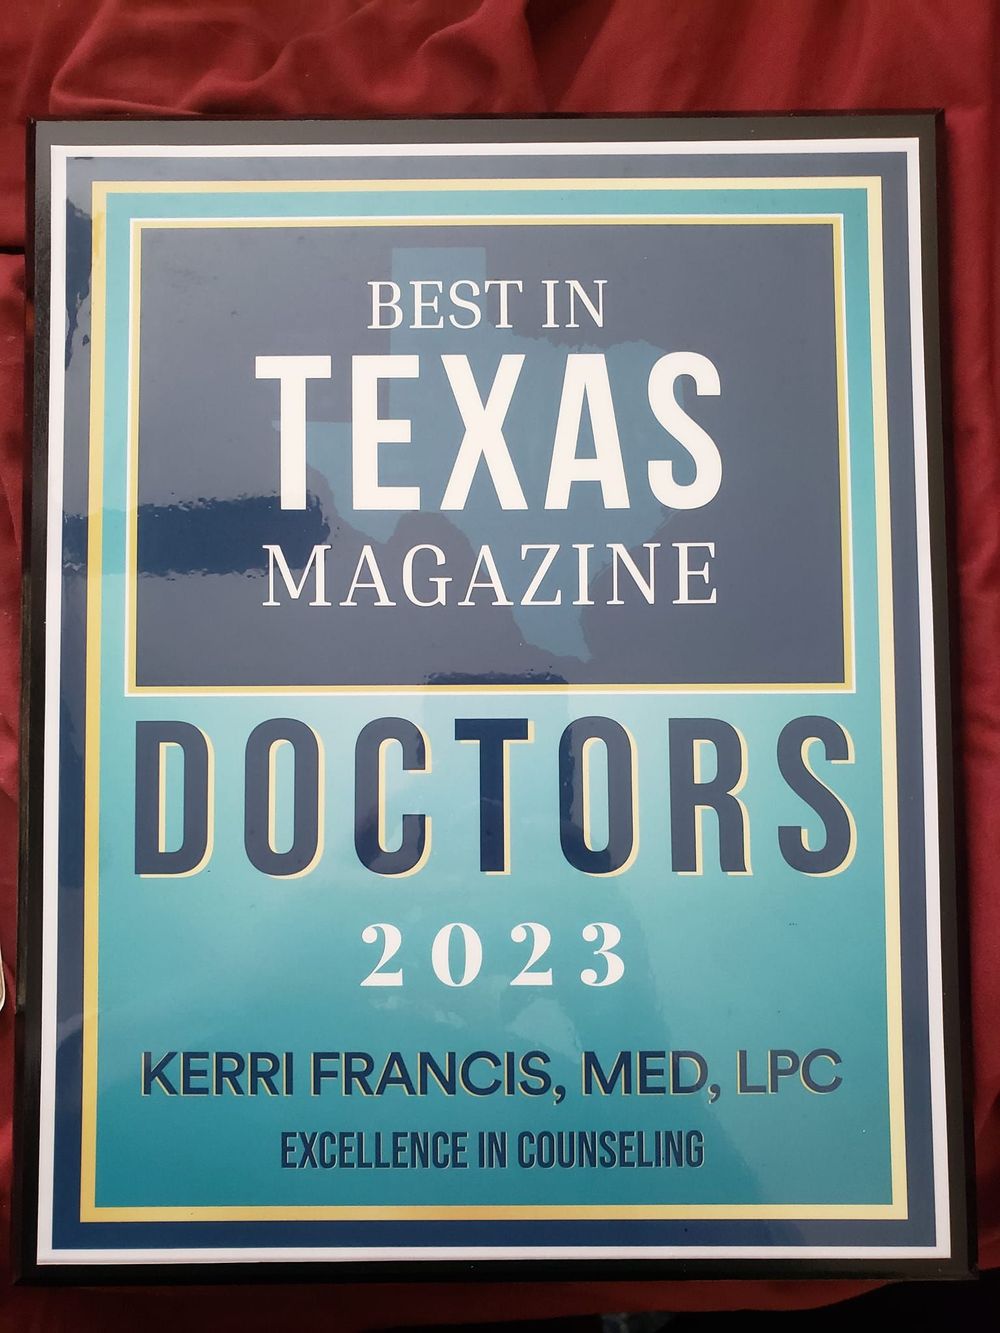 Selected as 2023 Top Therapist by Best In Texas Magazine